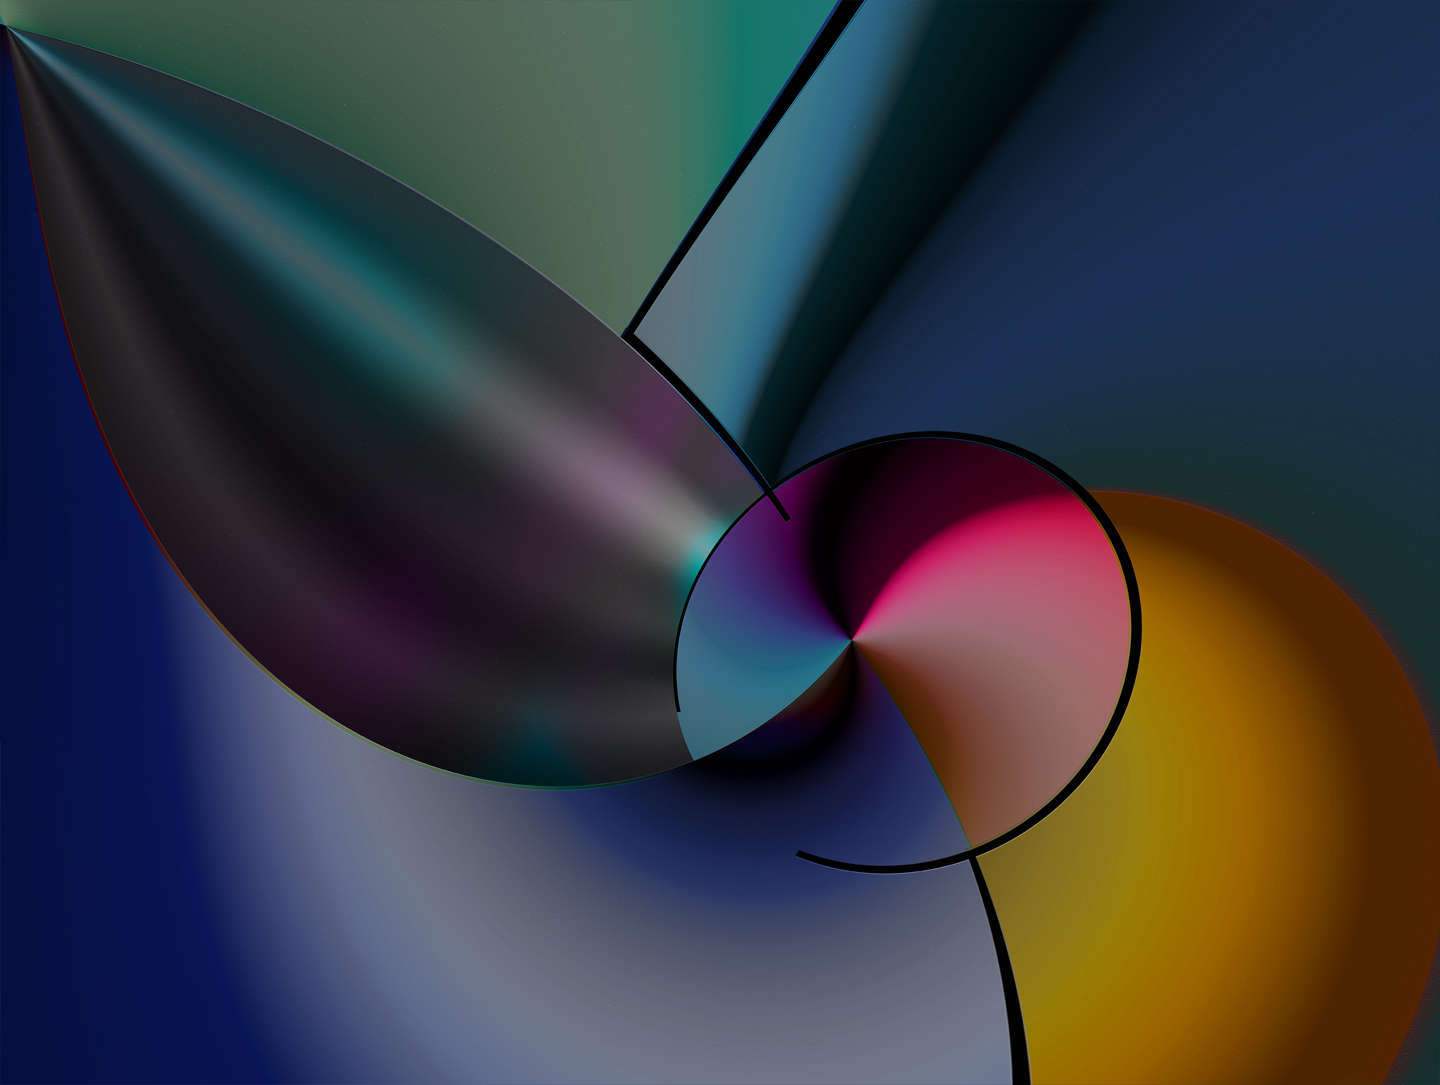 Forming-A-Time-Particle.jpg : Section 2 : American artist digital invention archival artifact color print image emerging capture creative convergent transparency universe dream history painter Hybrid exhibition